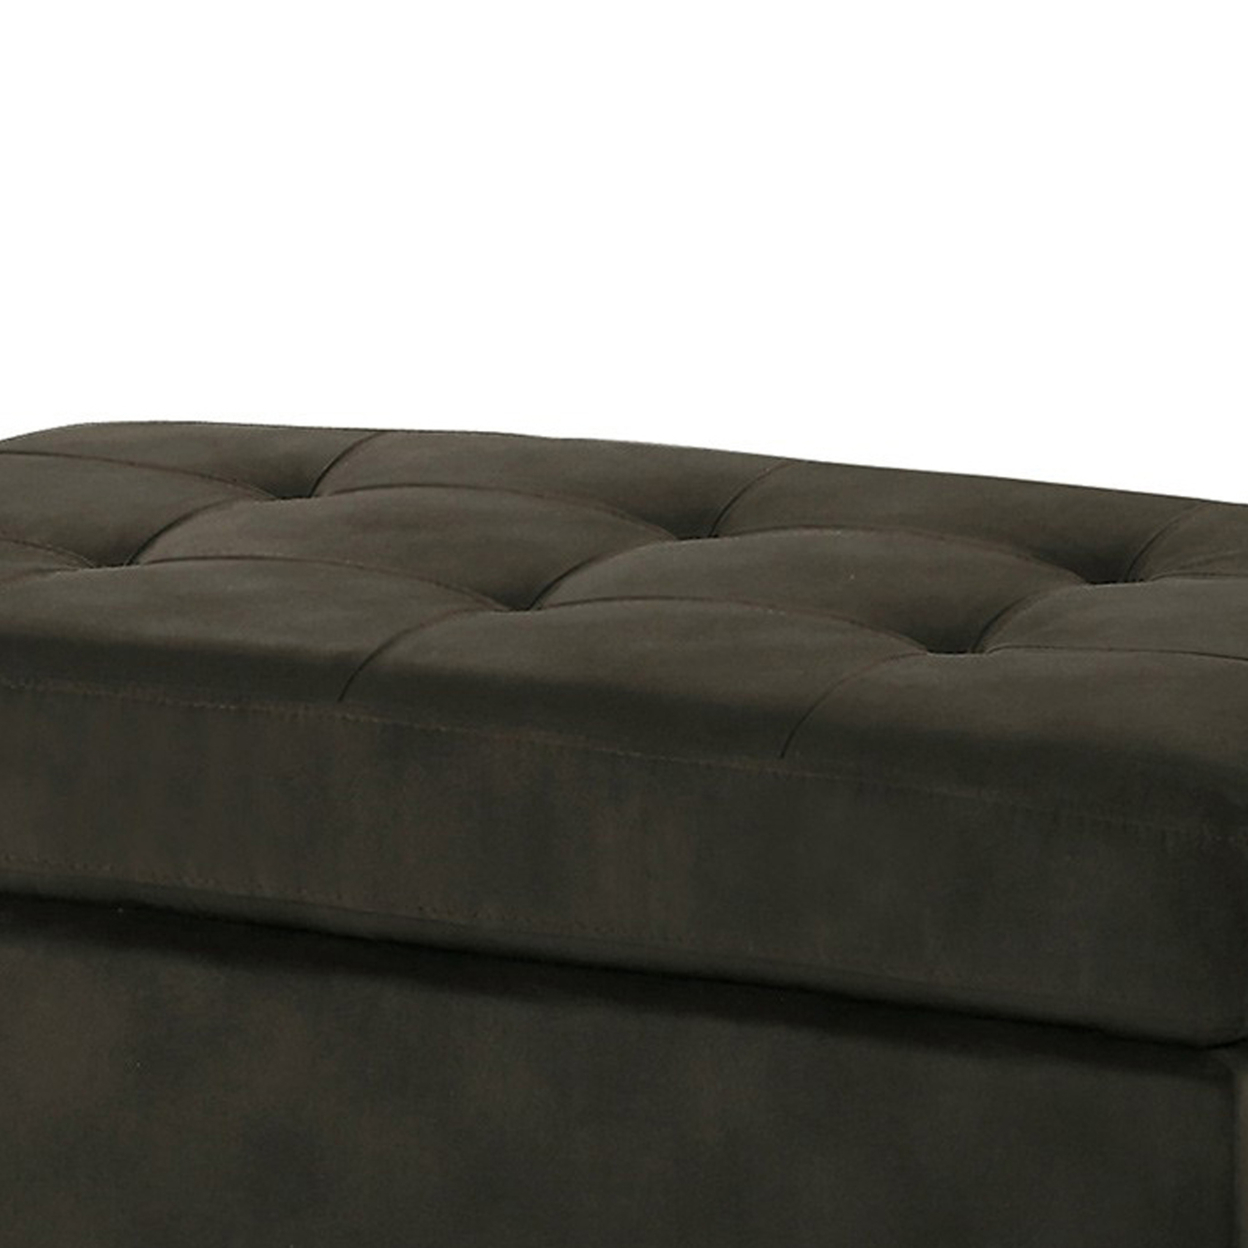 Polyester Upholstered Ottoman With Tufted Seat, Chocolate Brown- Saltoro Sherpi